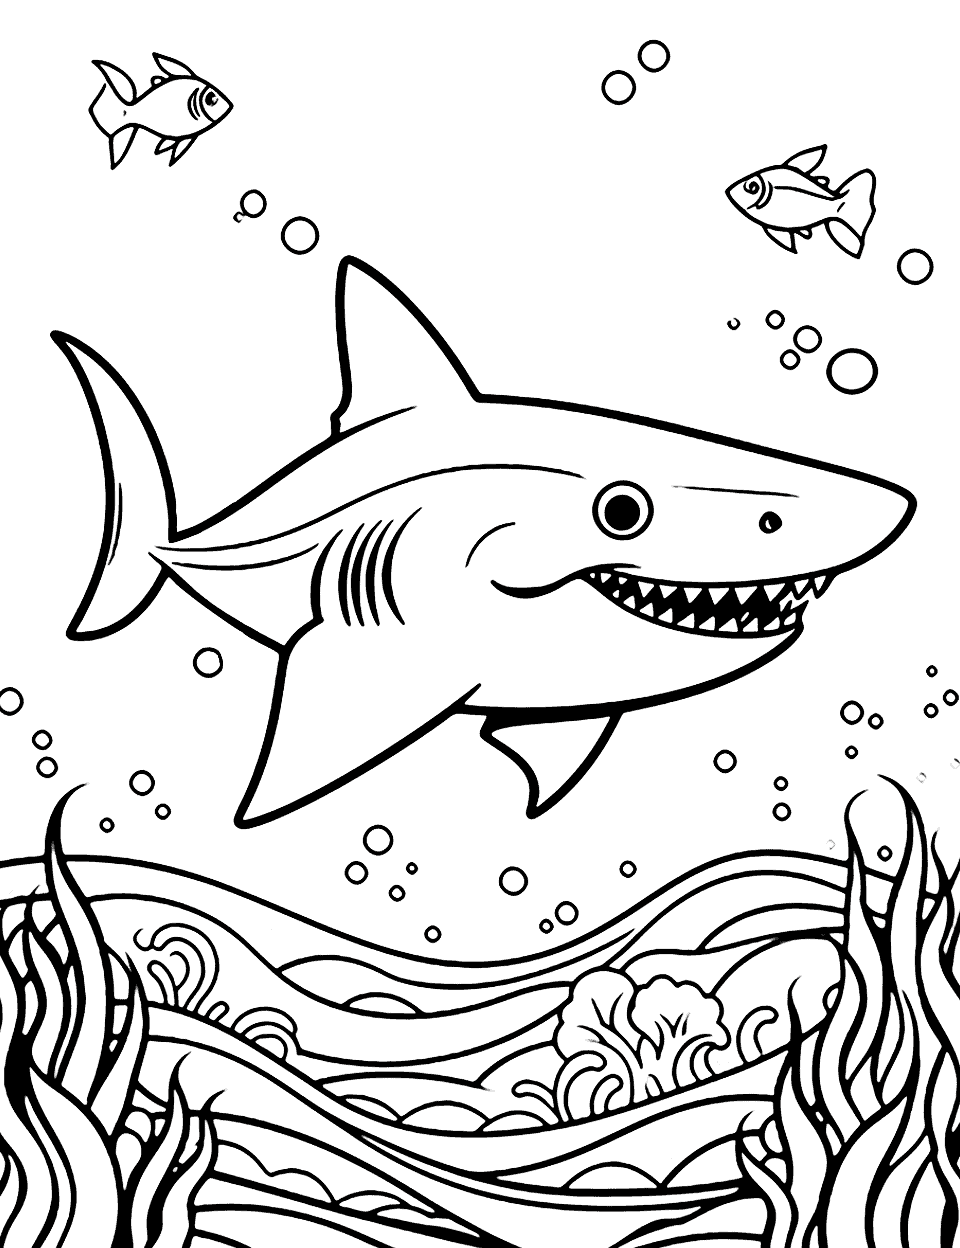 Black Tip Shark's Night Hunt Shark Coloring Page - A dynamic scene of a black tip shark hunting in the moonlight.